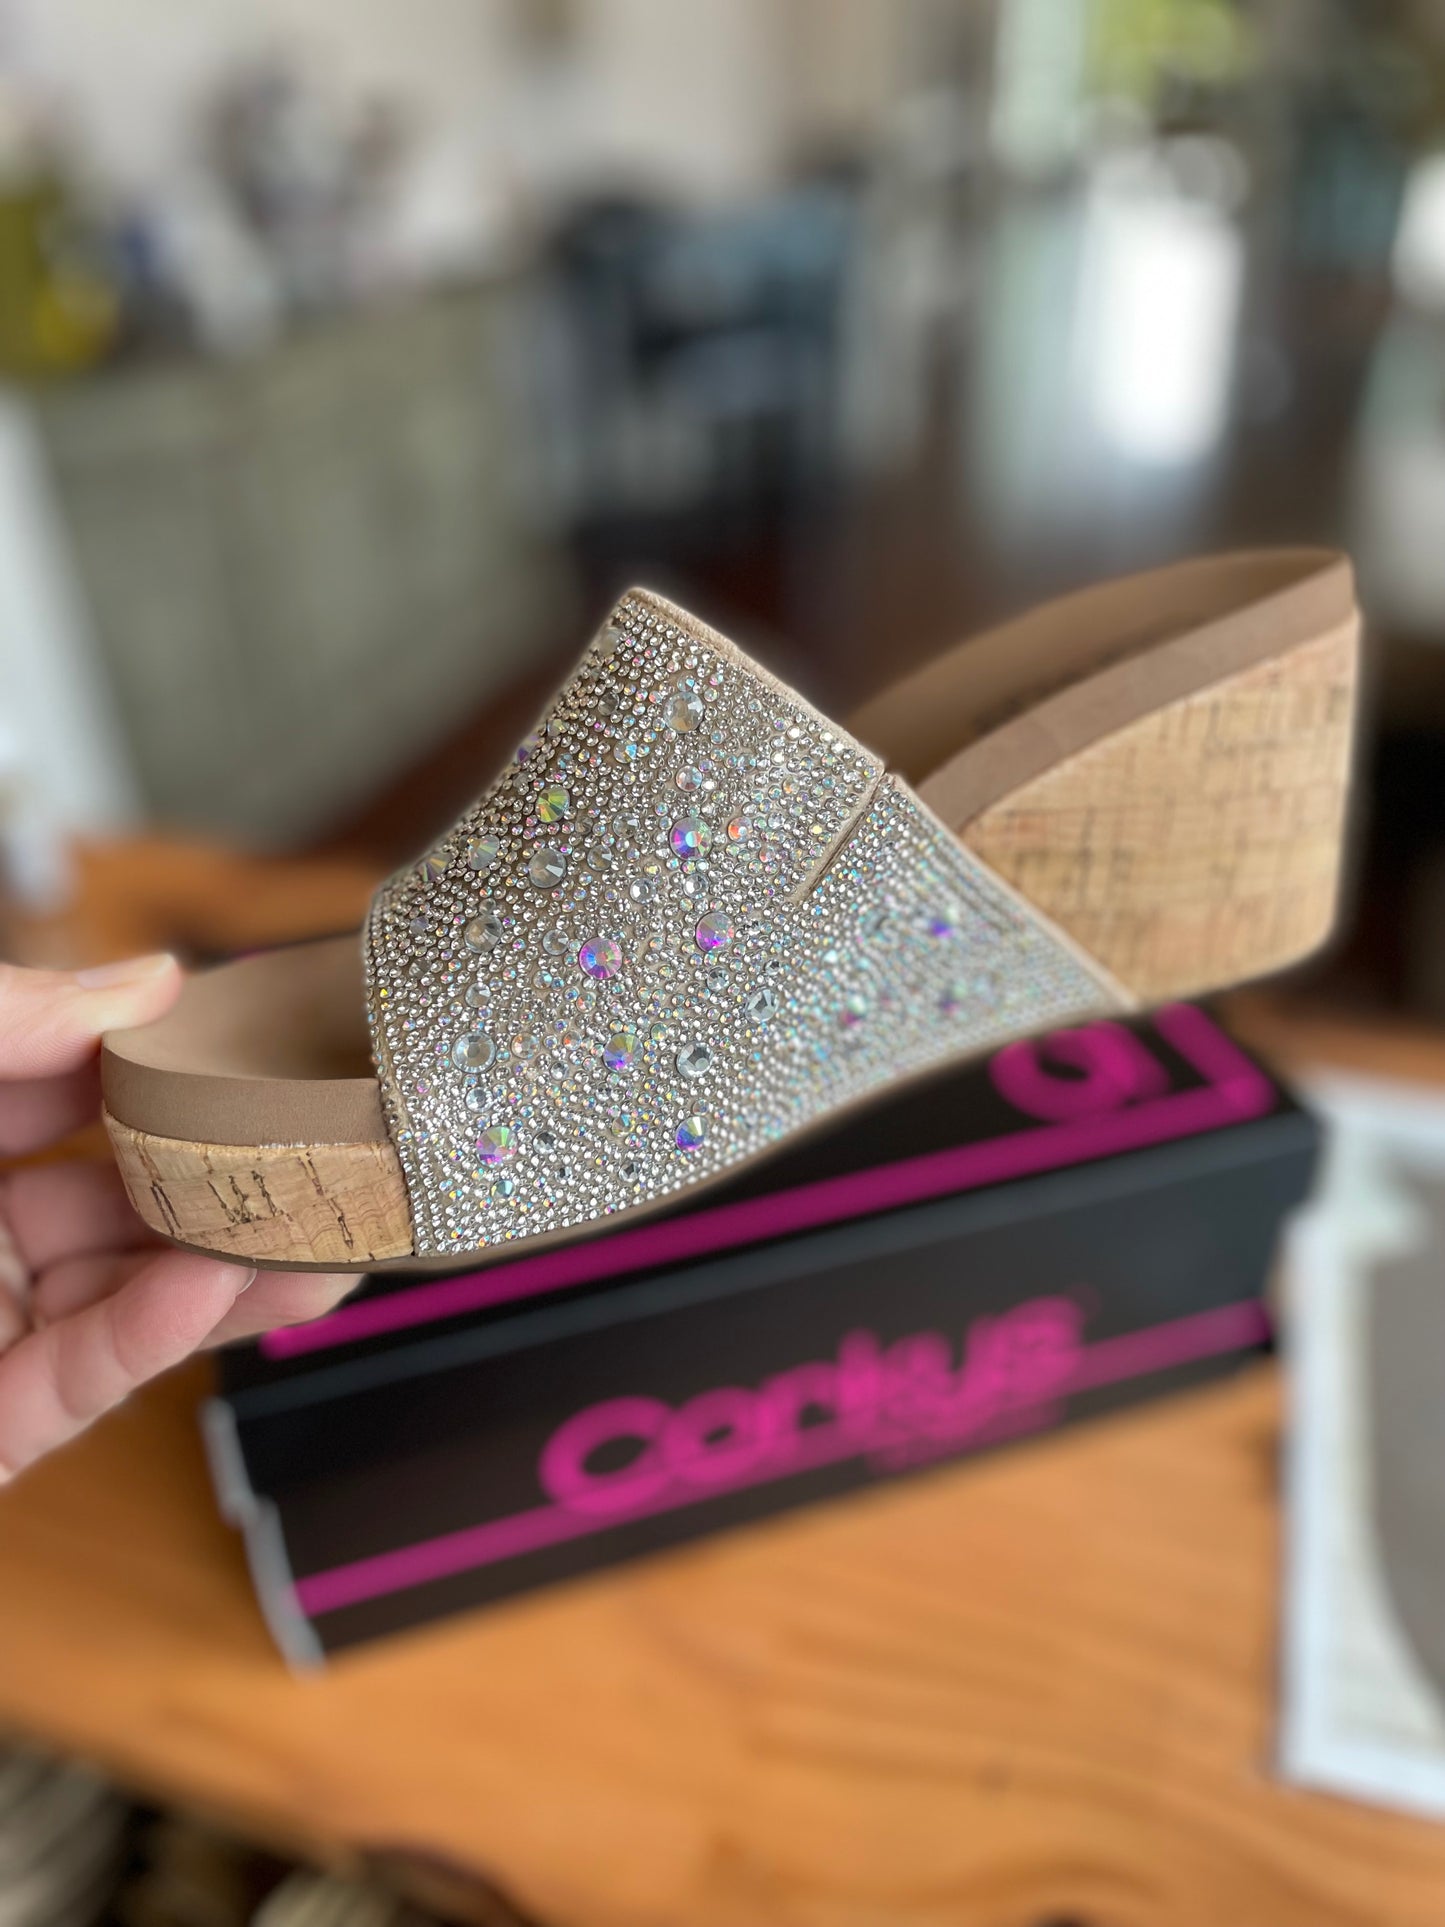 Corky’s Sunlight Wedge (2 options)